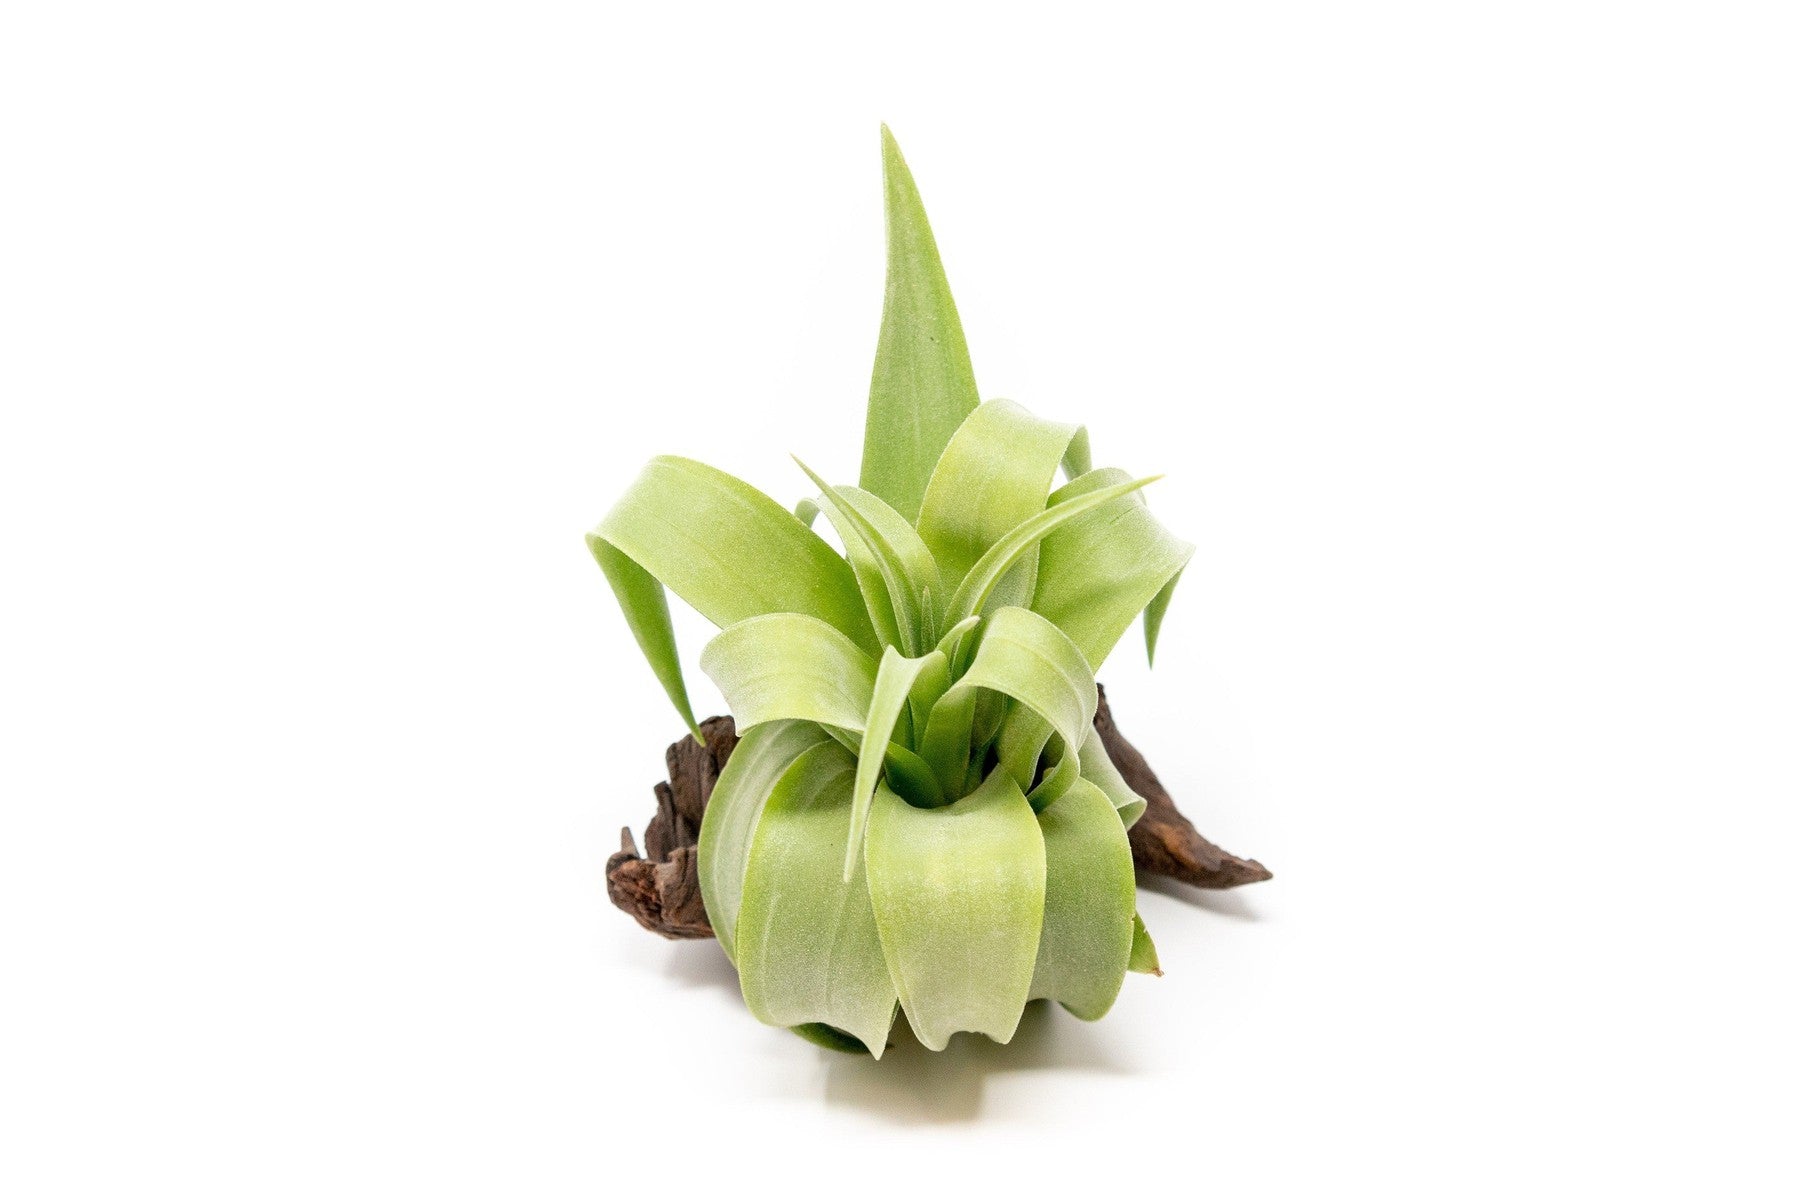 SALE - Tillandsia Streptophylla Air Plants - Set of 3 or 6 - 30% Off-airplant-The Succulent Source